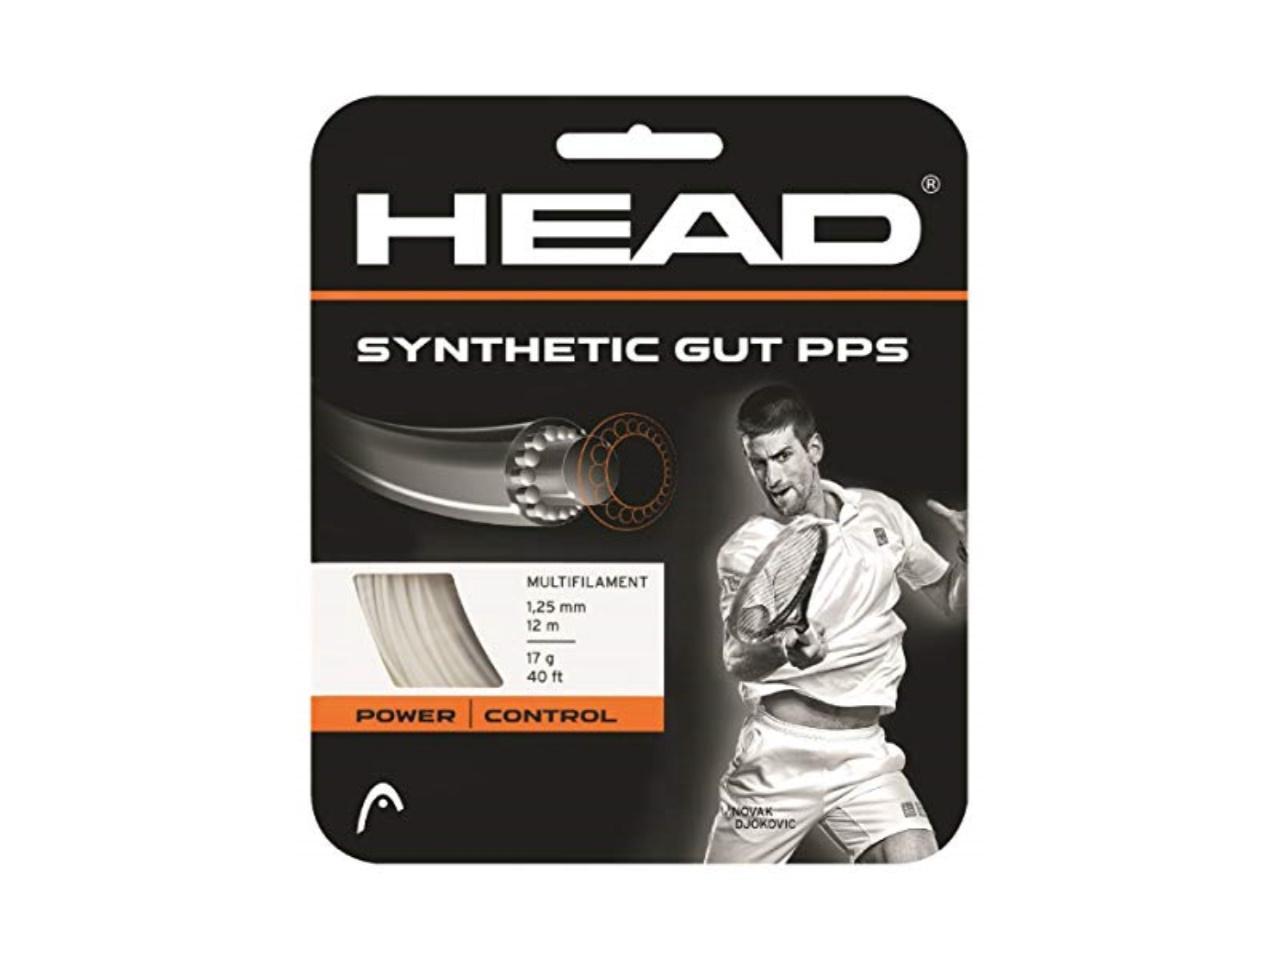 Head Synthetic Gut PPS Multifilament Tennis Racket String